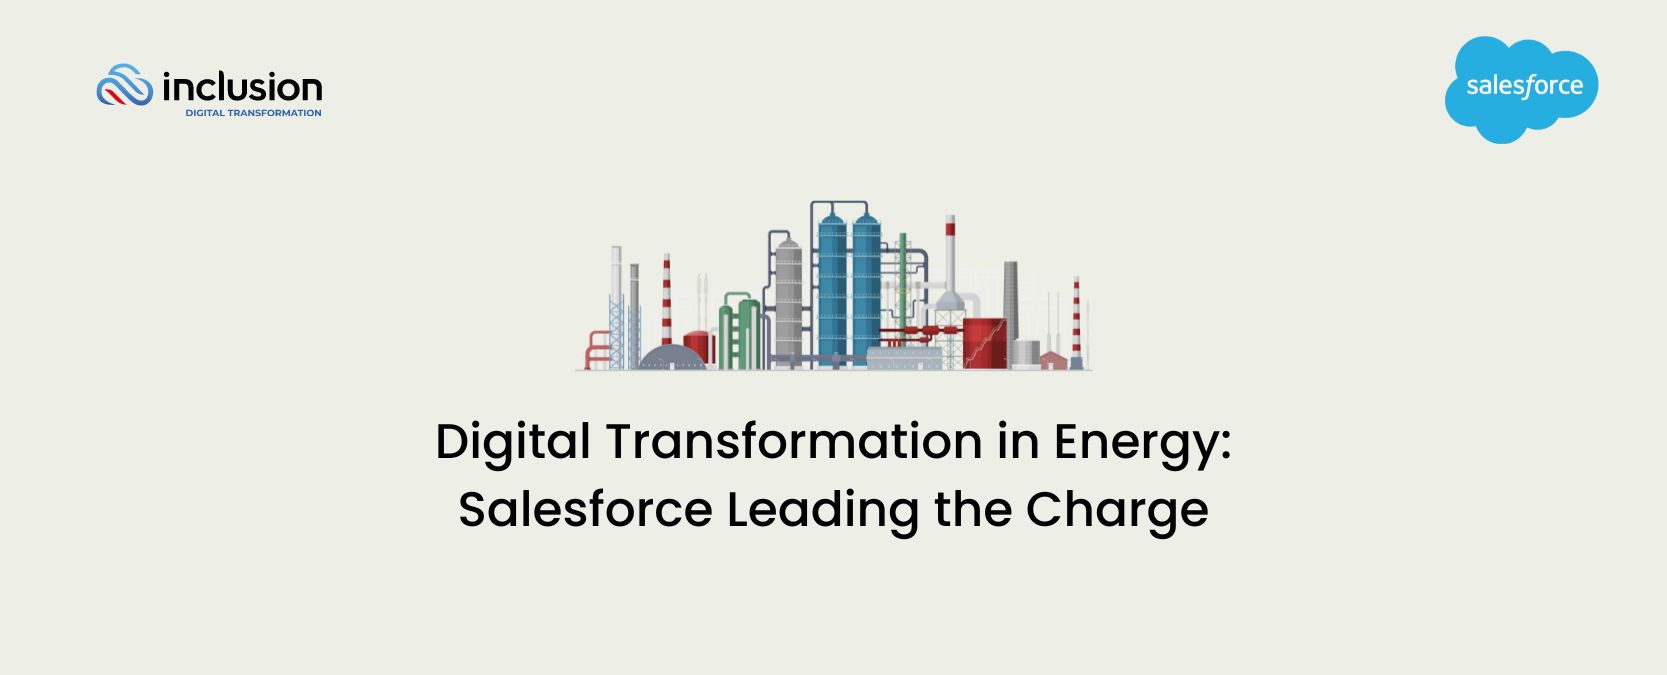 Digital Transformation in Energy Salesforce Leading the Charge